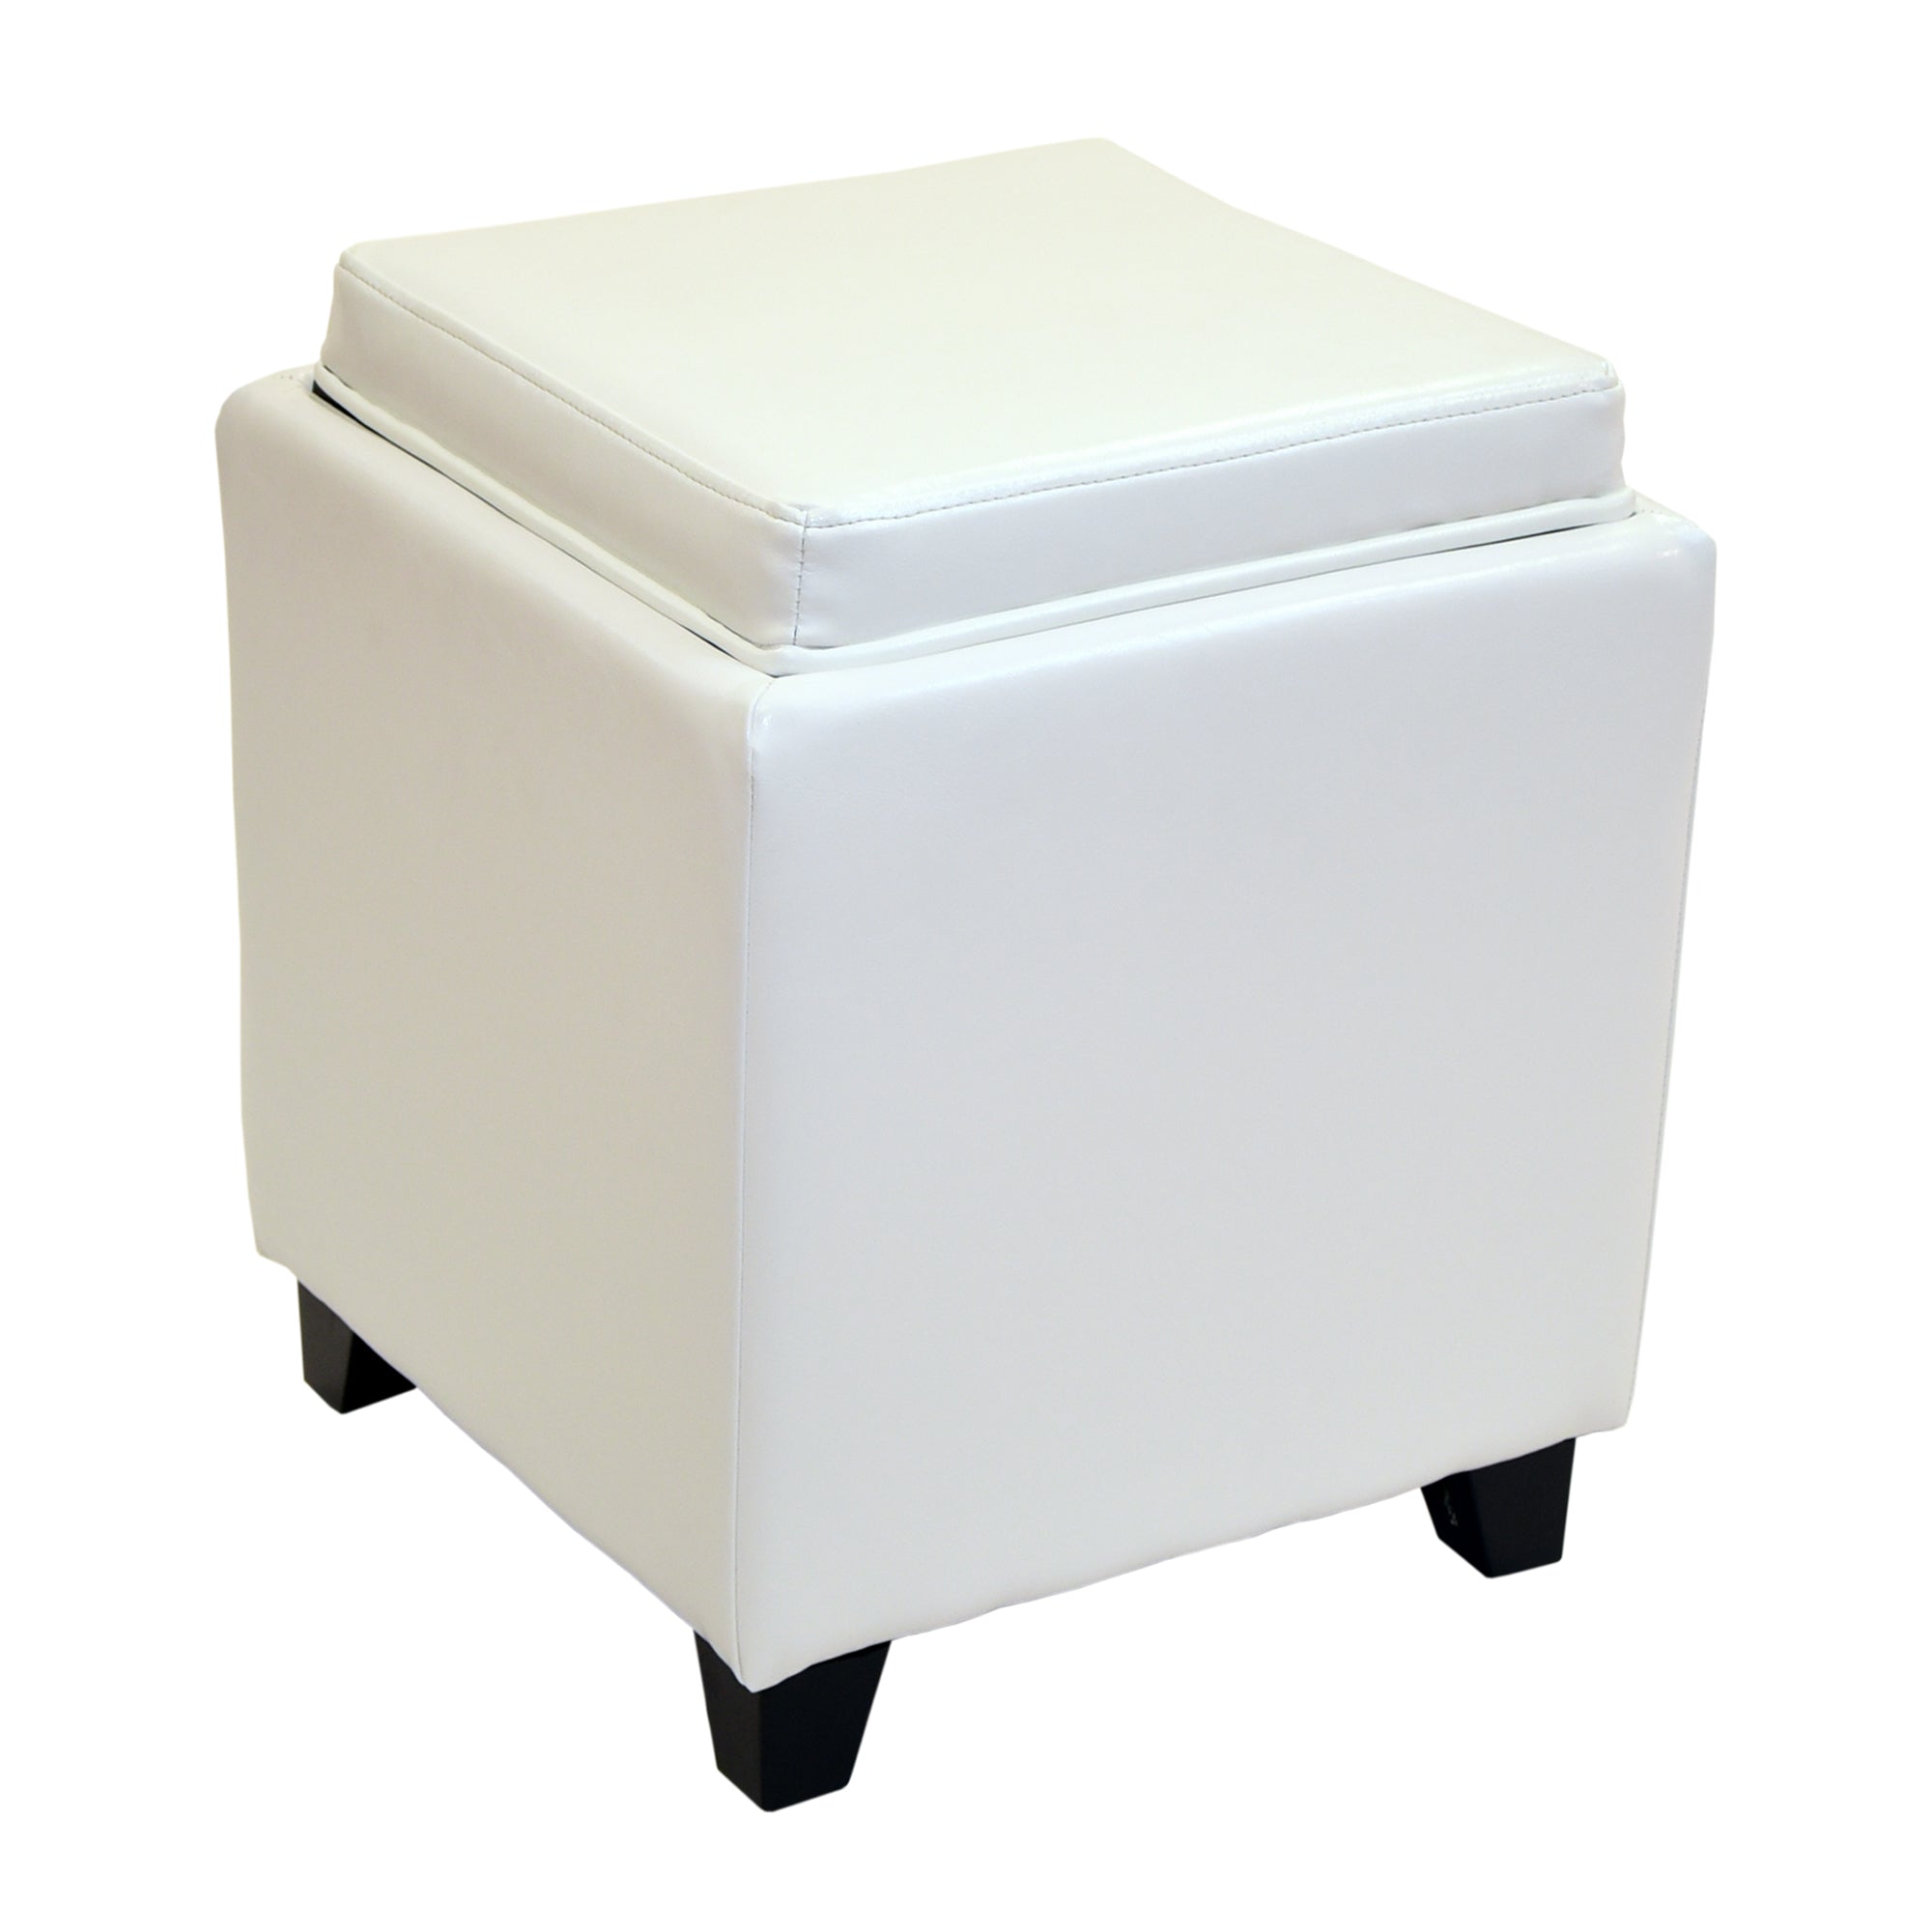 Armen Living Lc530otlewh Rainbow Contemporary Storage Ottoman With Tray In White Bonded Leather